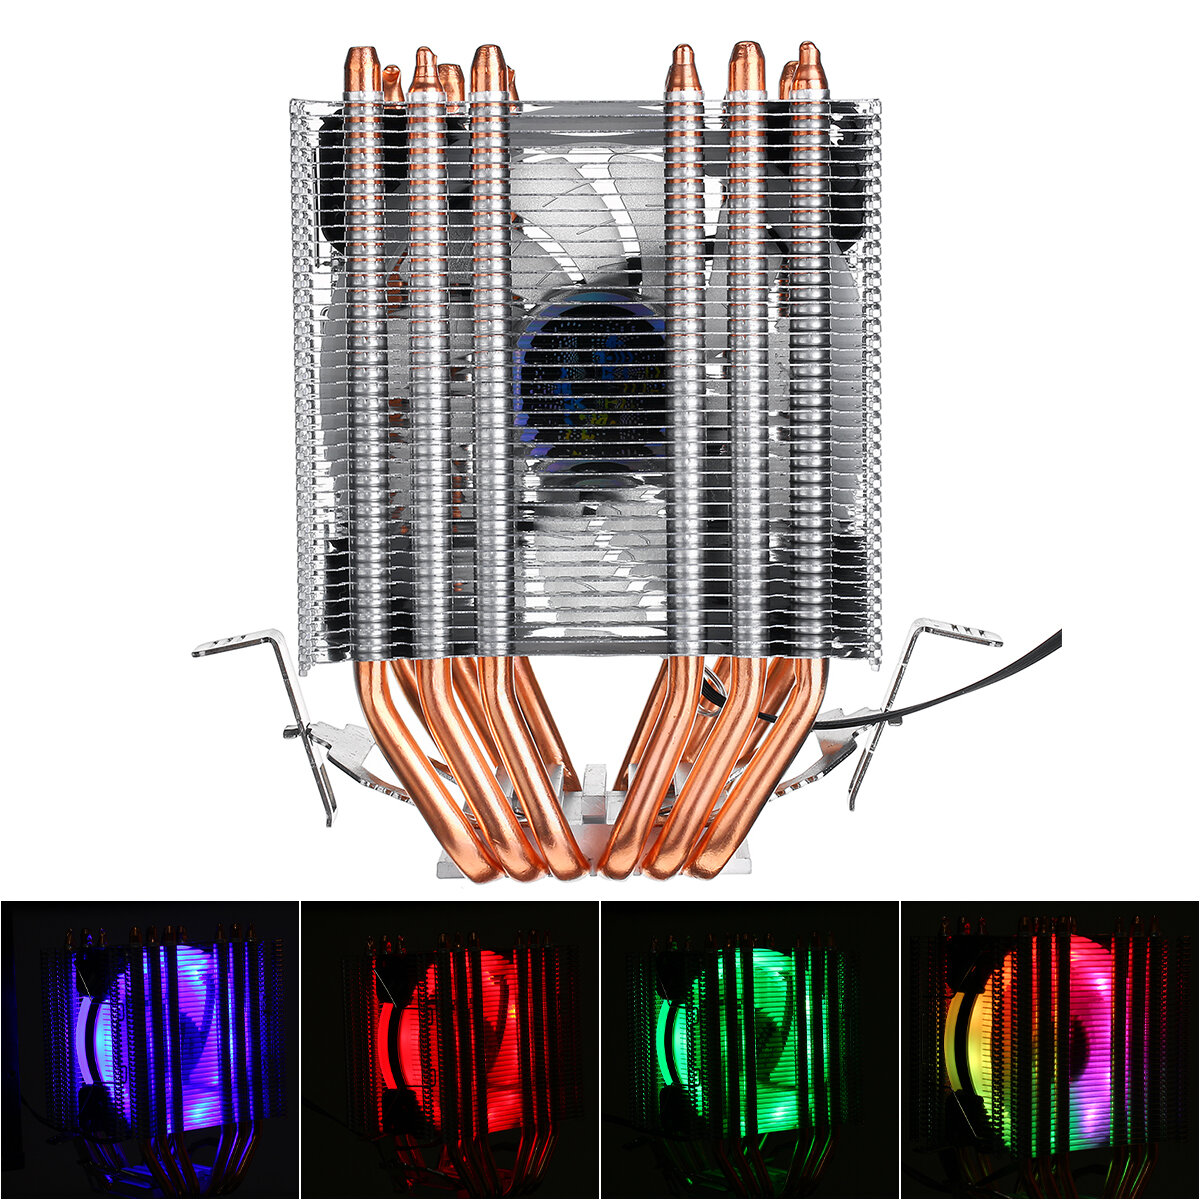 

LED RGB CPU Cooler 6 Heatpipes 4Pin Cooling Fan for Intel 1155/1151/1150/775 AMD